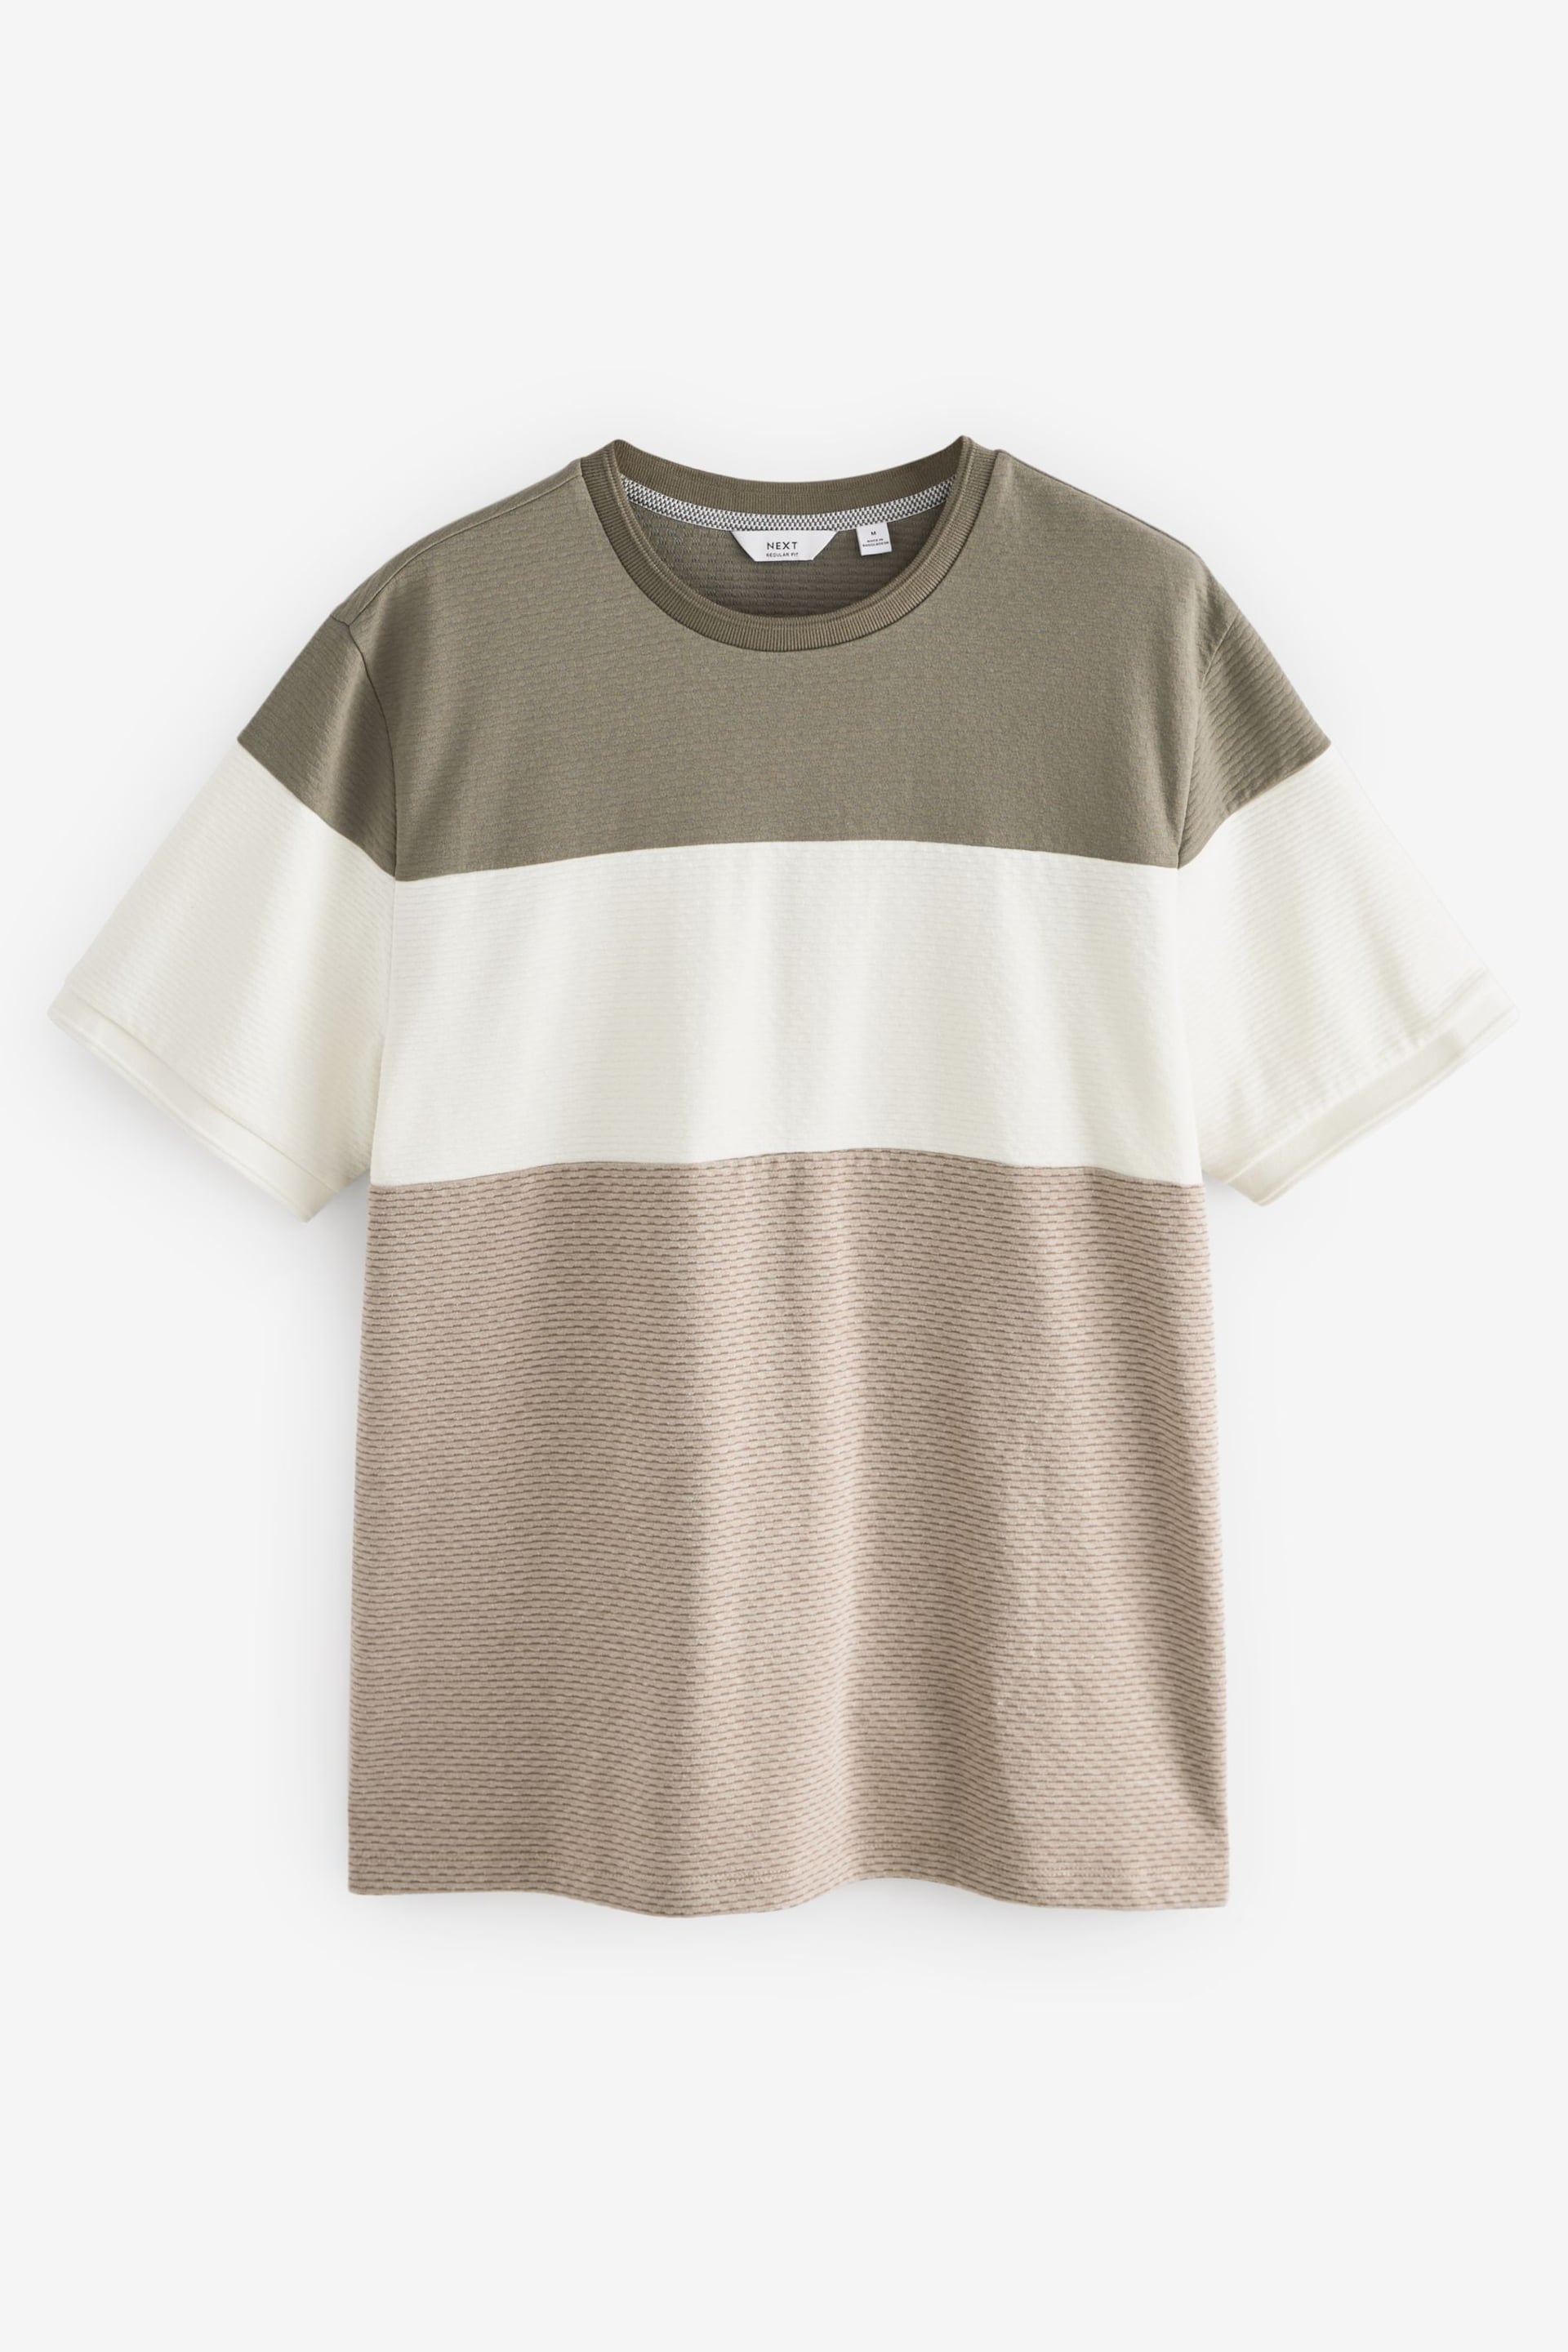 Neutral Textured Colour Block T-Shirt - Image 6 of 8